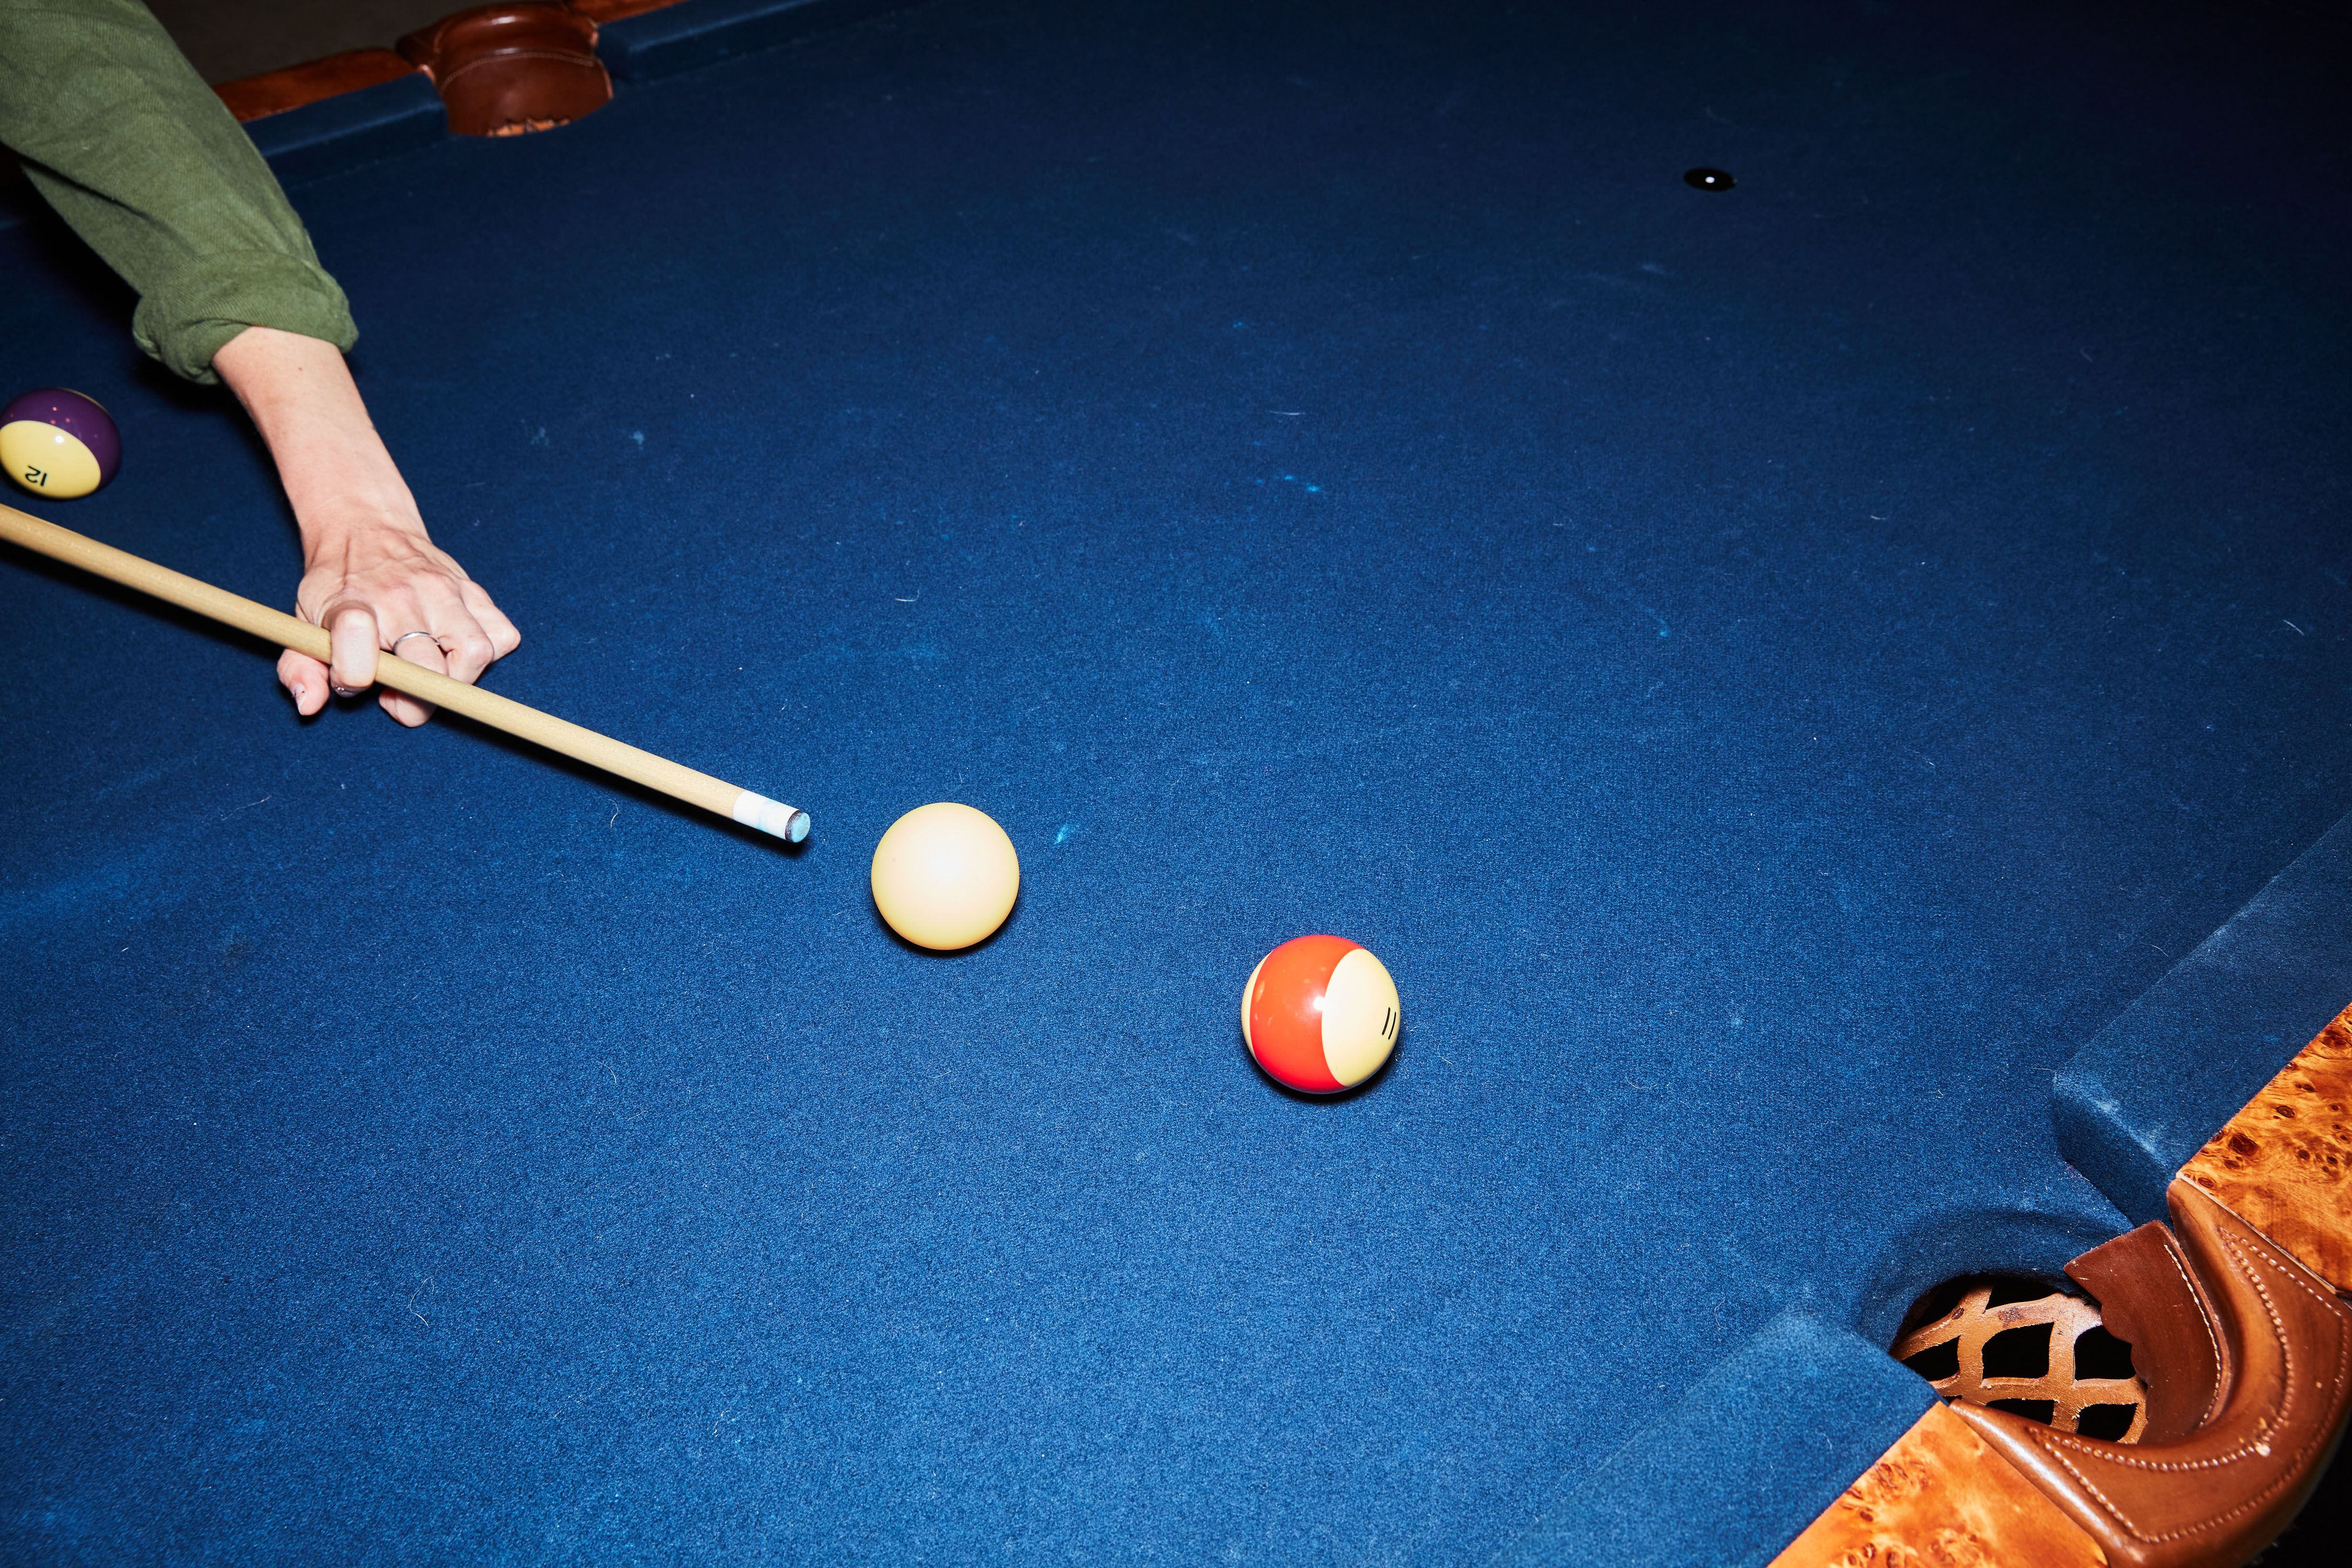 How to Use Math to Beat Your Friends at Pool